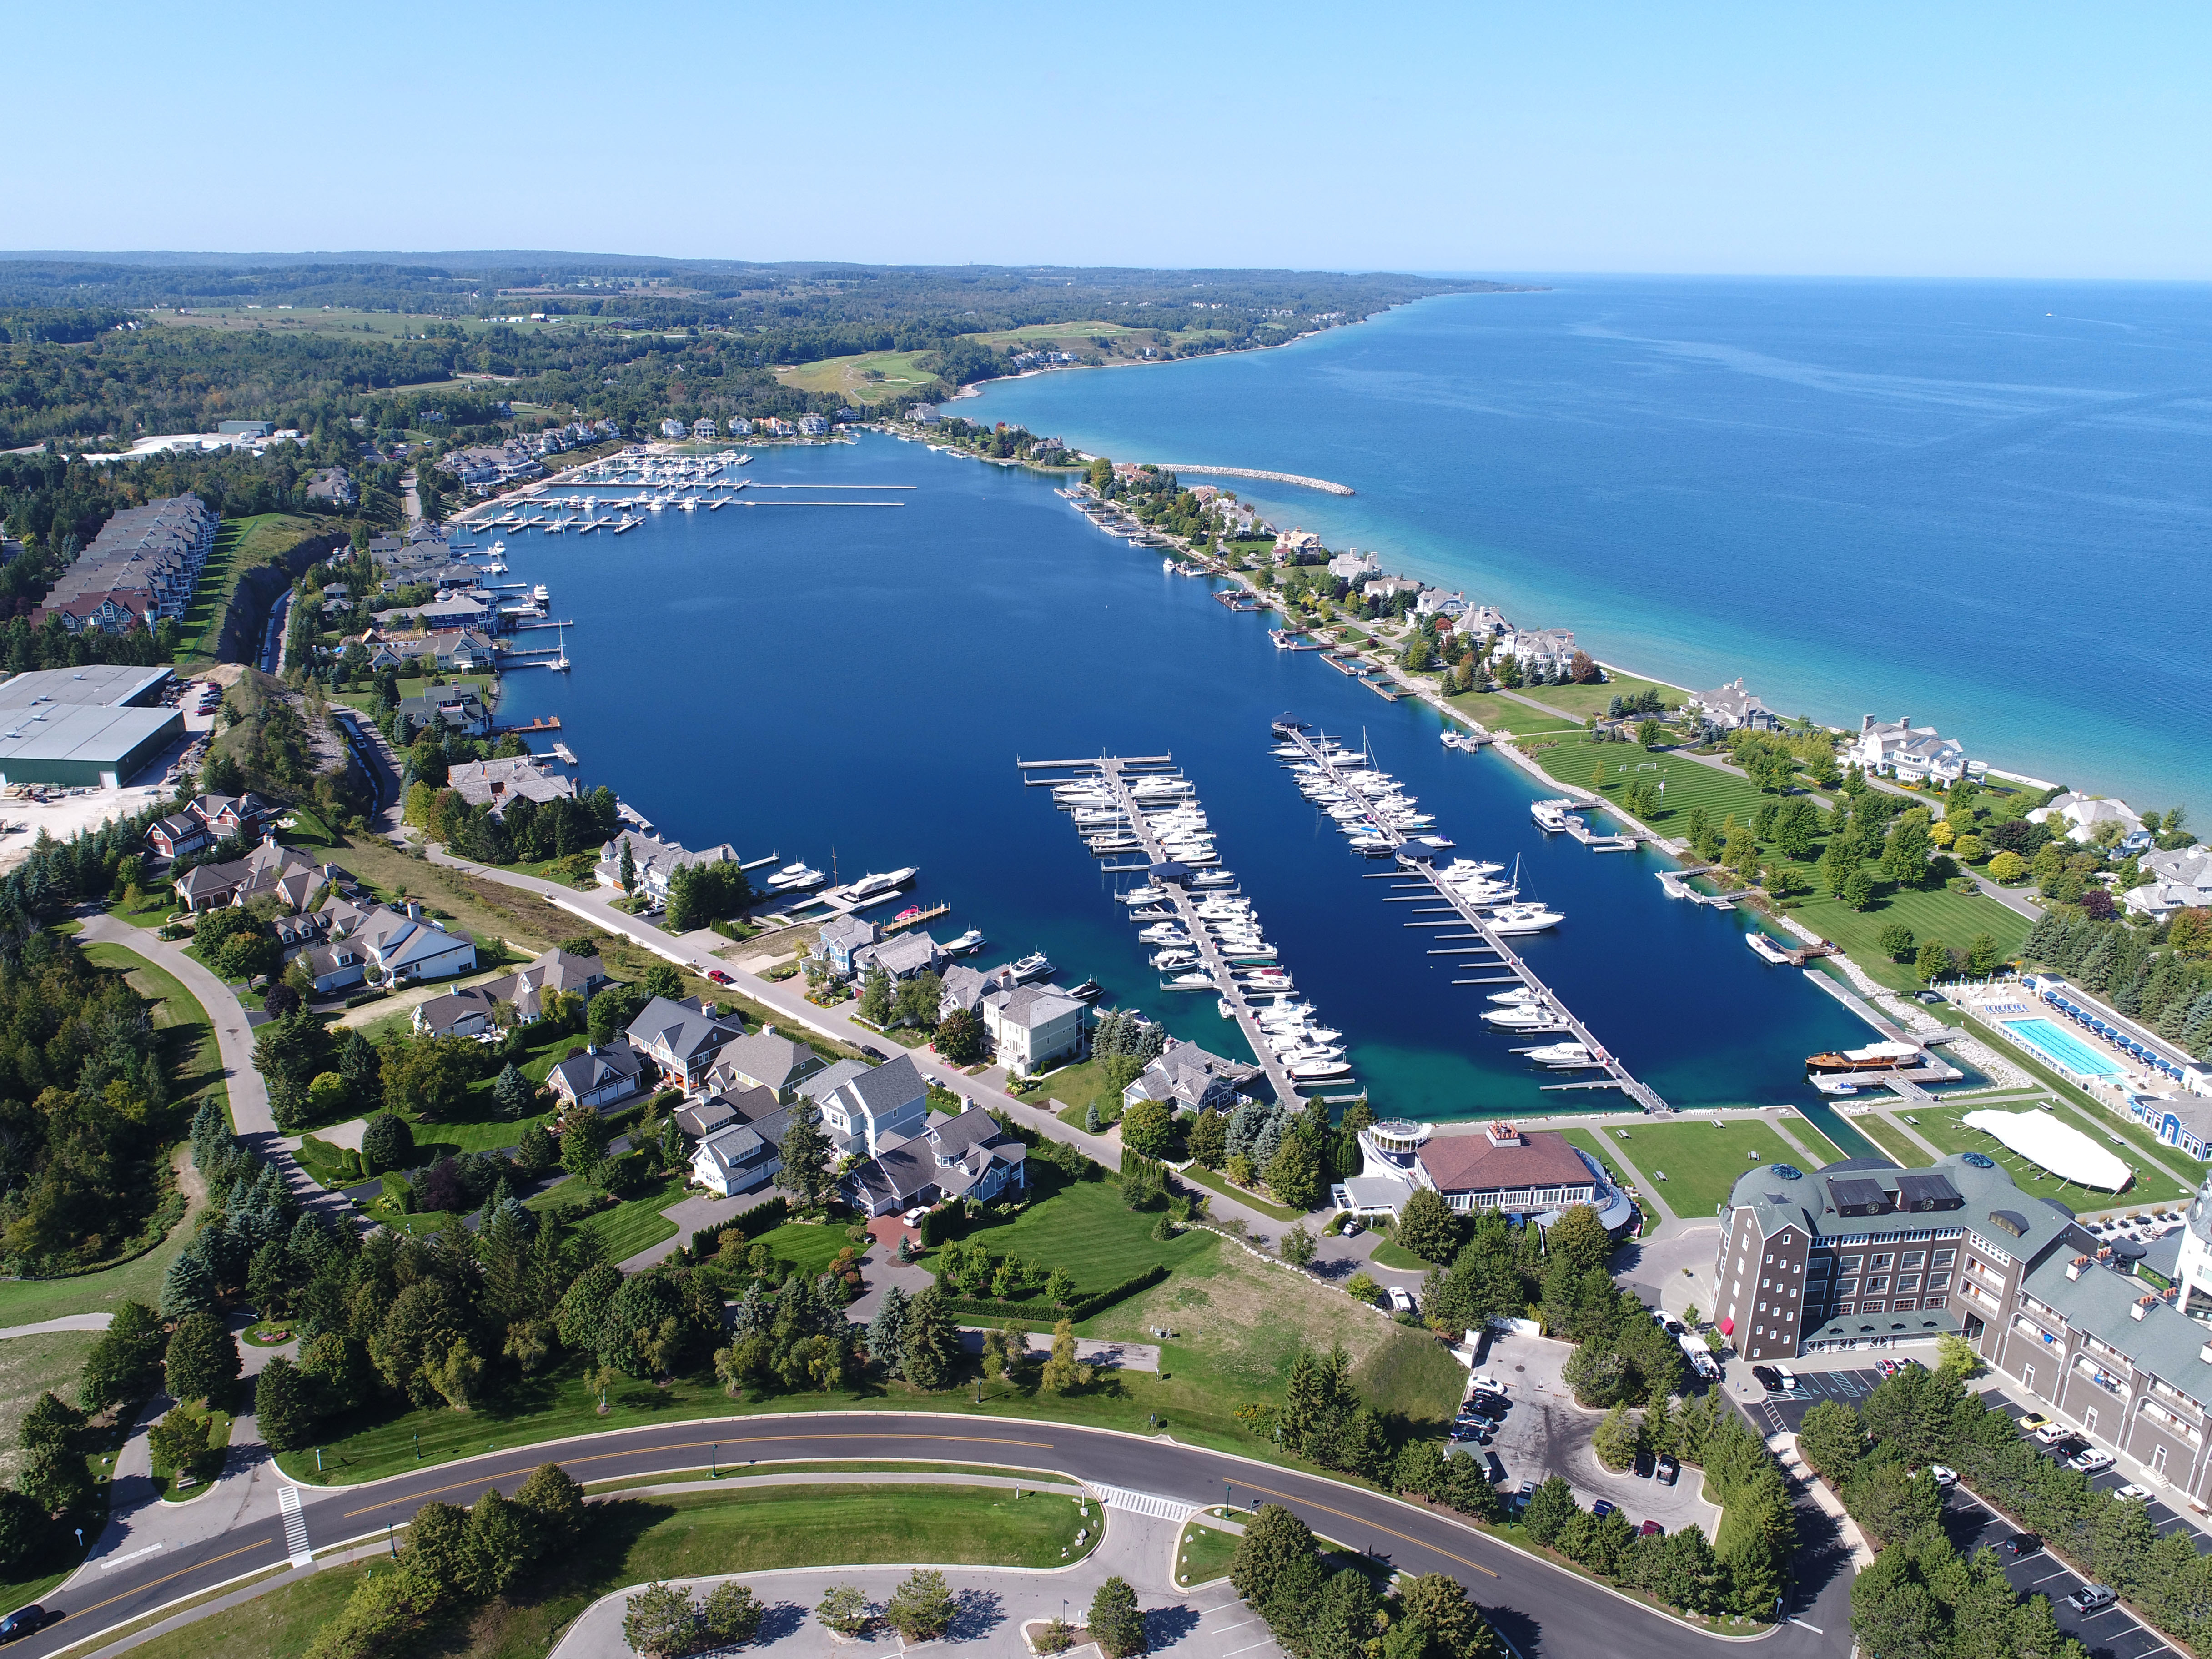 Picture of a Bay Harbor, Michigan Home for Sale